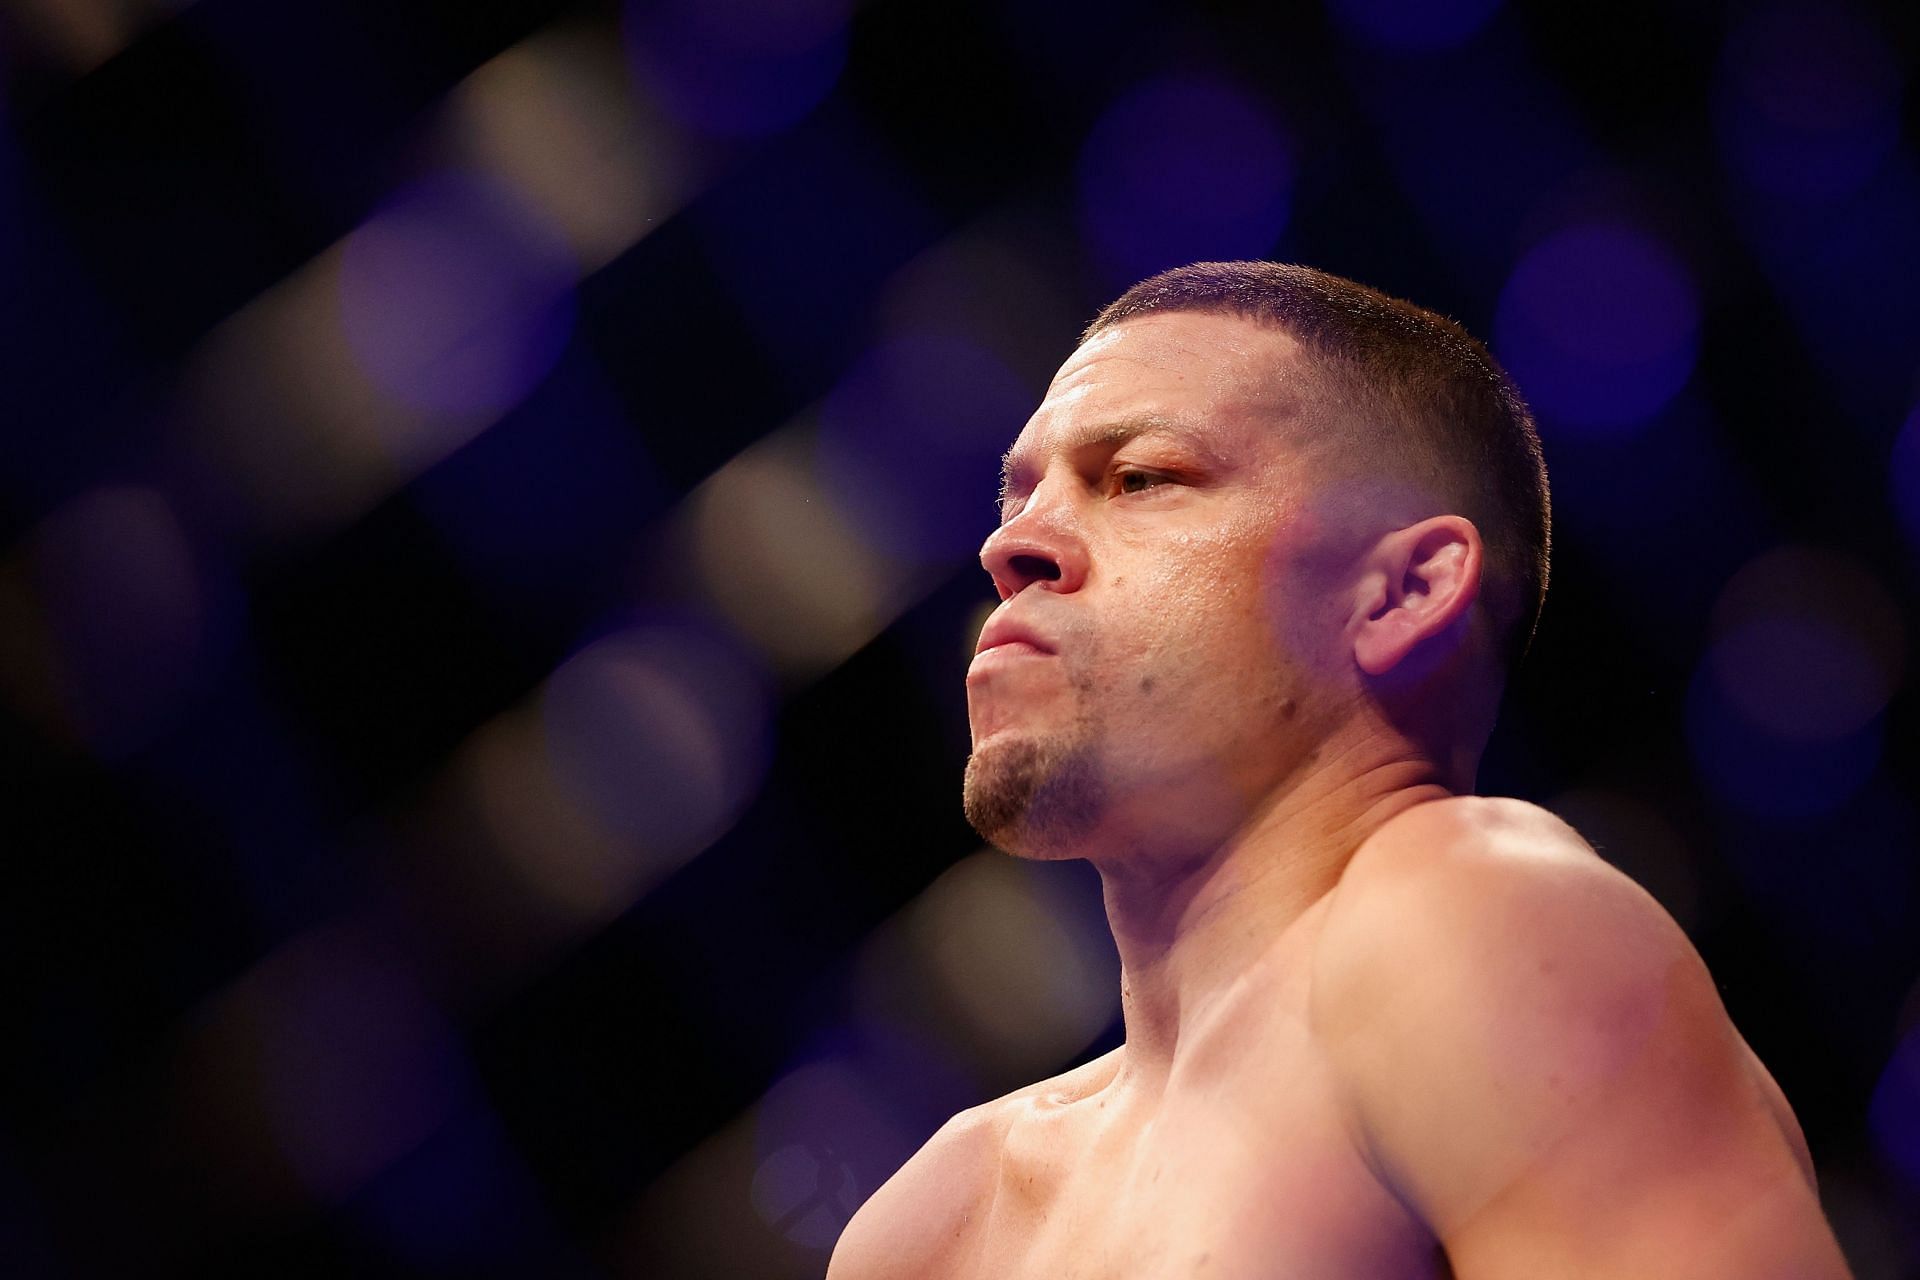 Nate Diaz&#039;s popularity has continued to rise despite his recent losses